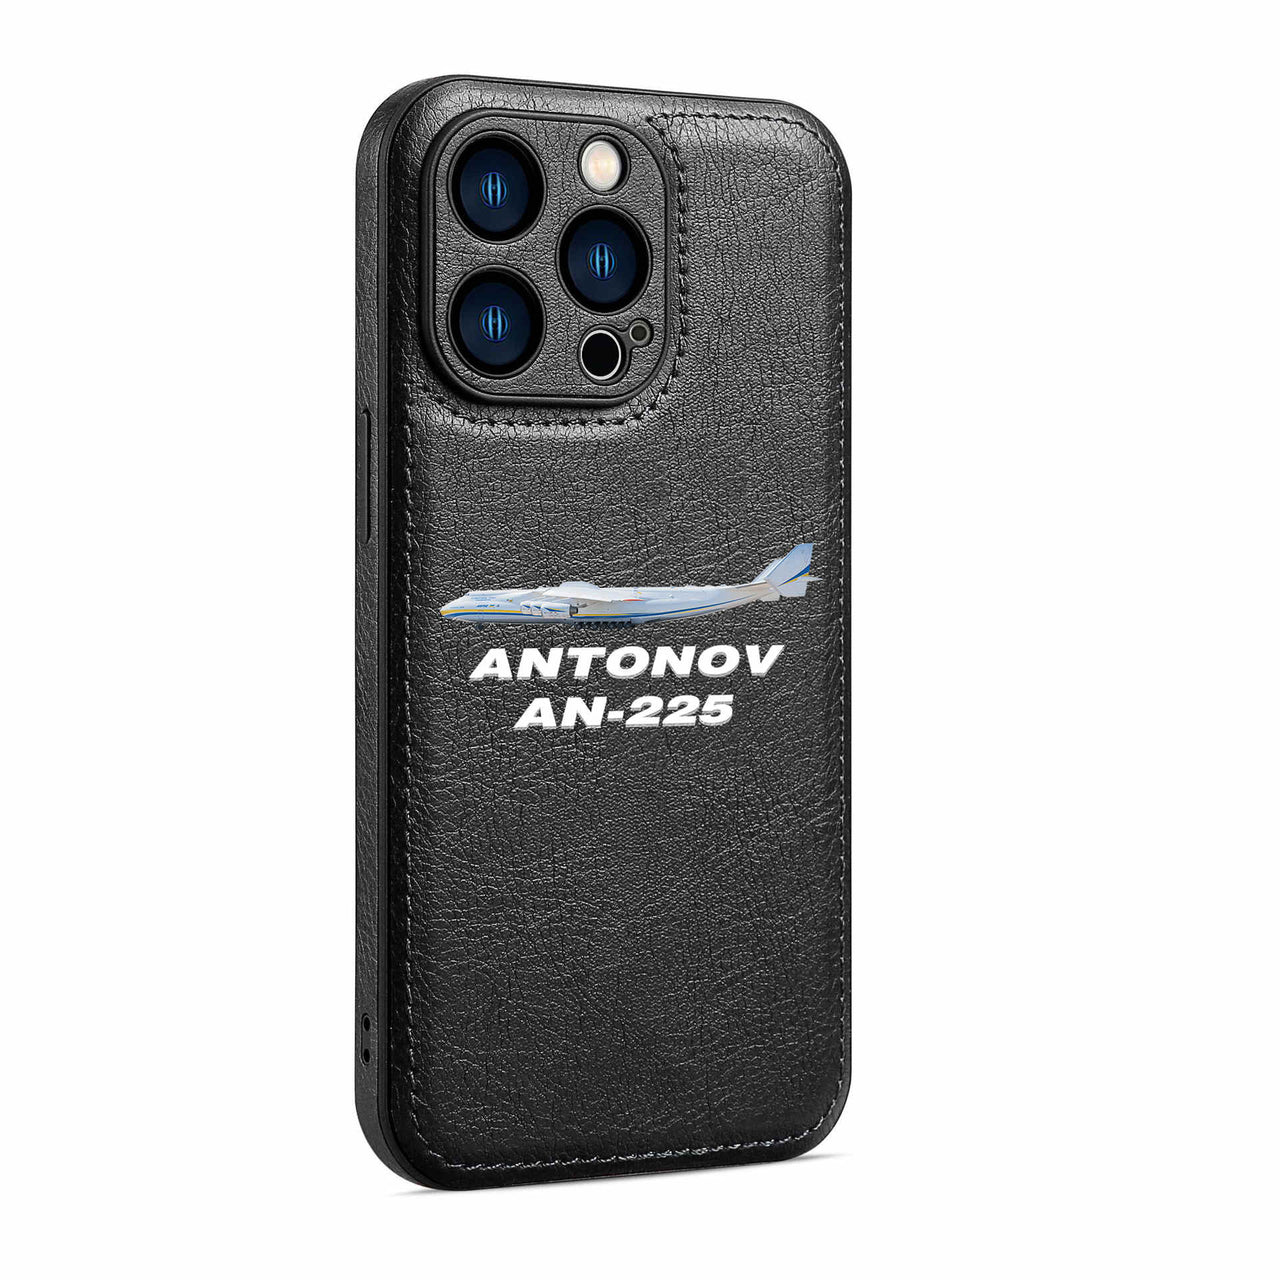 The Antonov AN-225 Designed Leather iPhone Cases